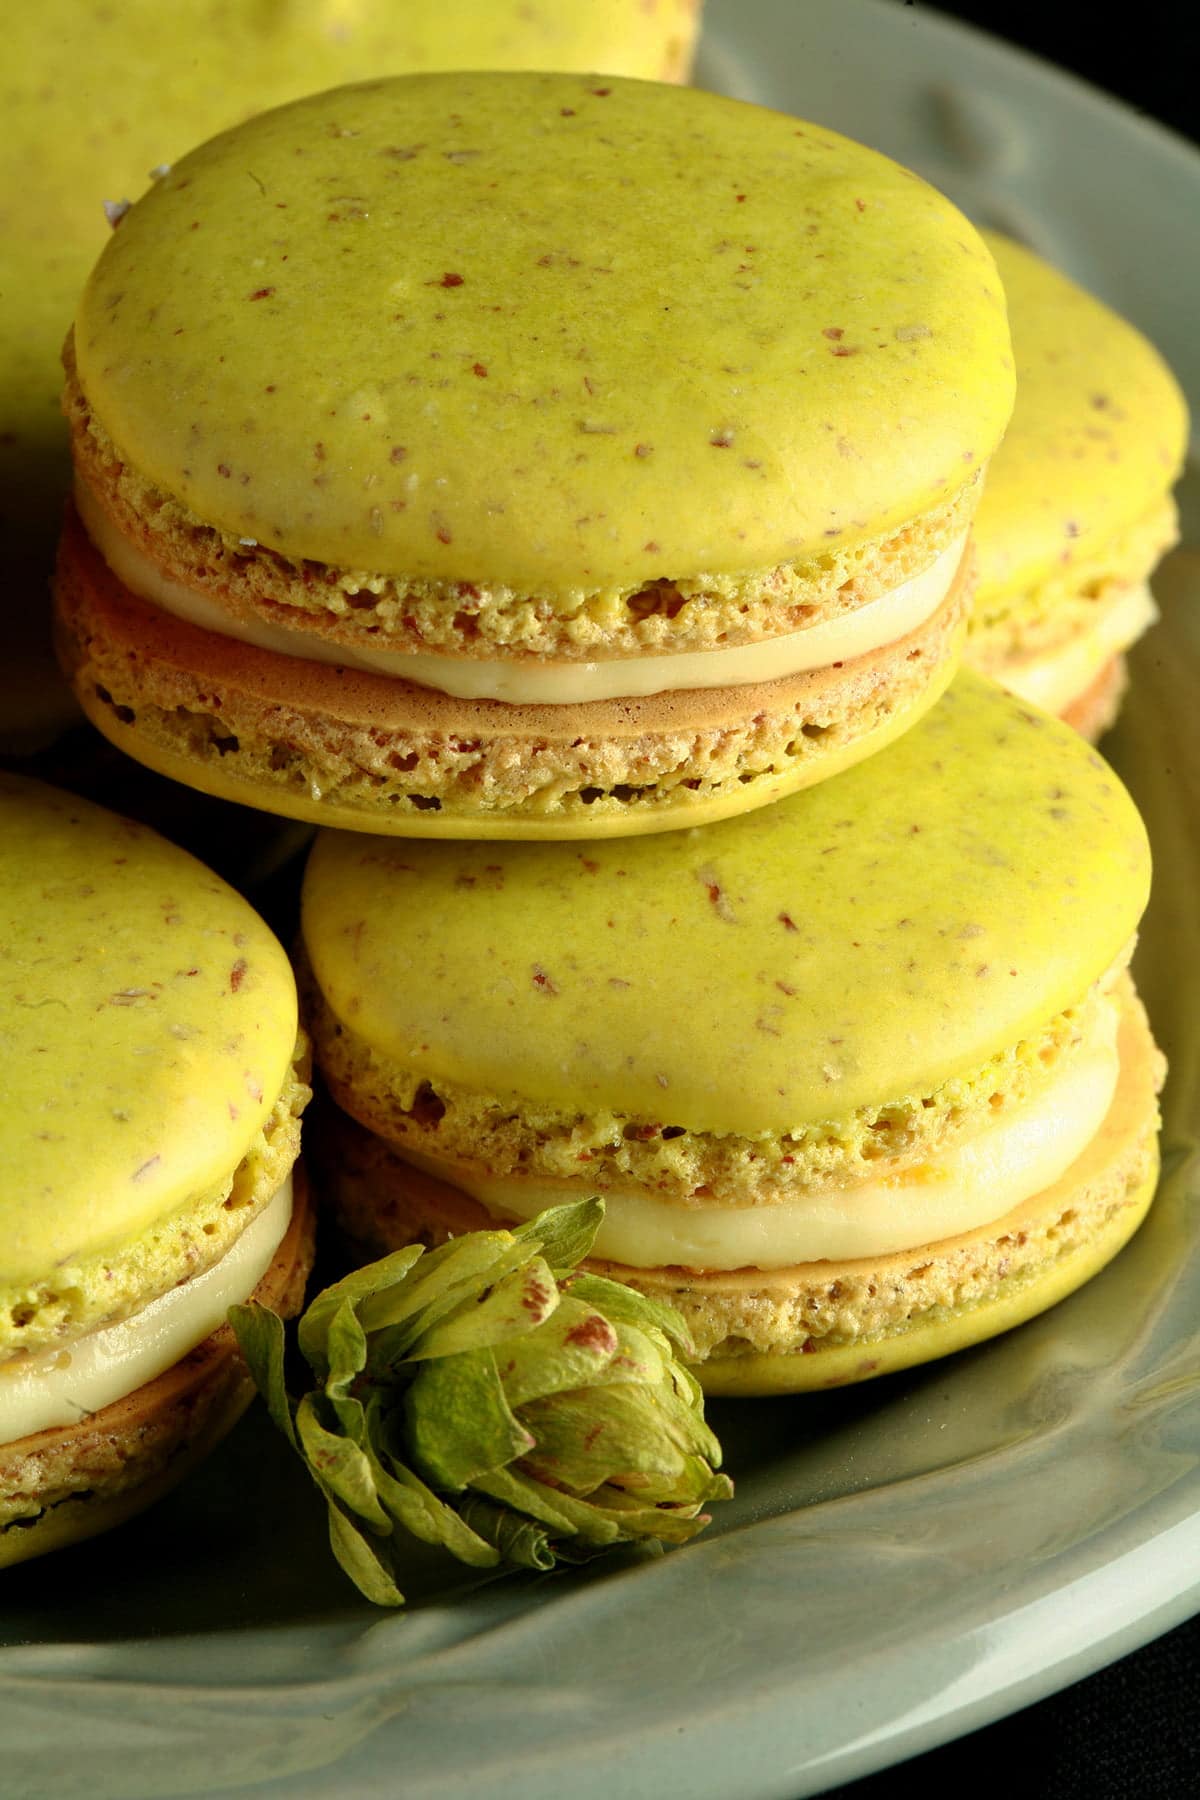 A small green plate is piled high with bright lime green Citrus Hop French Macarons. There is a fresh hop flower on the plate, and bits of orange zest visible in the filling of the macarons.